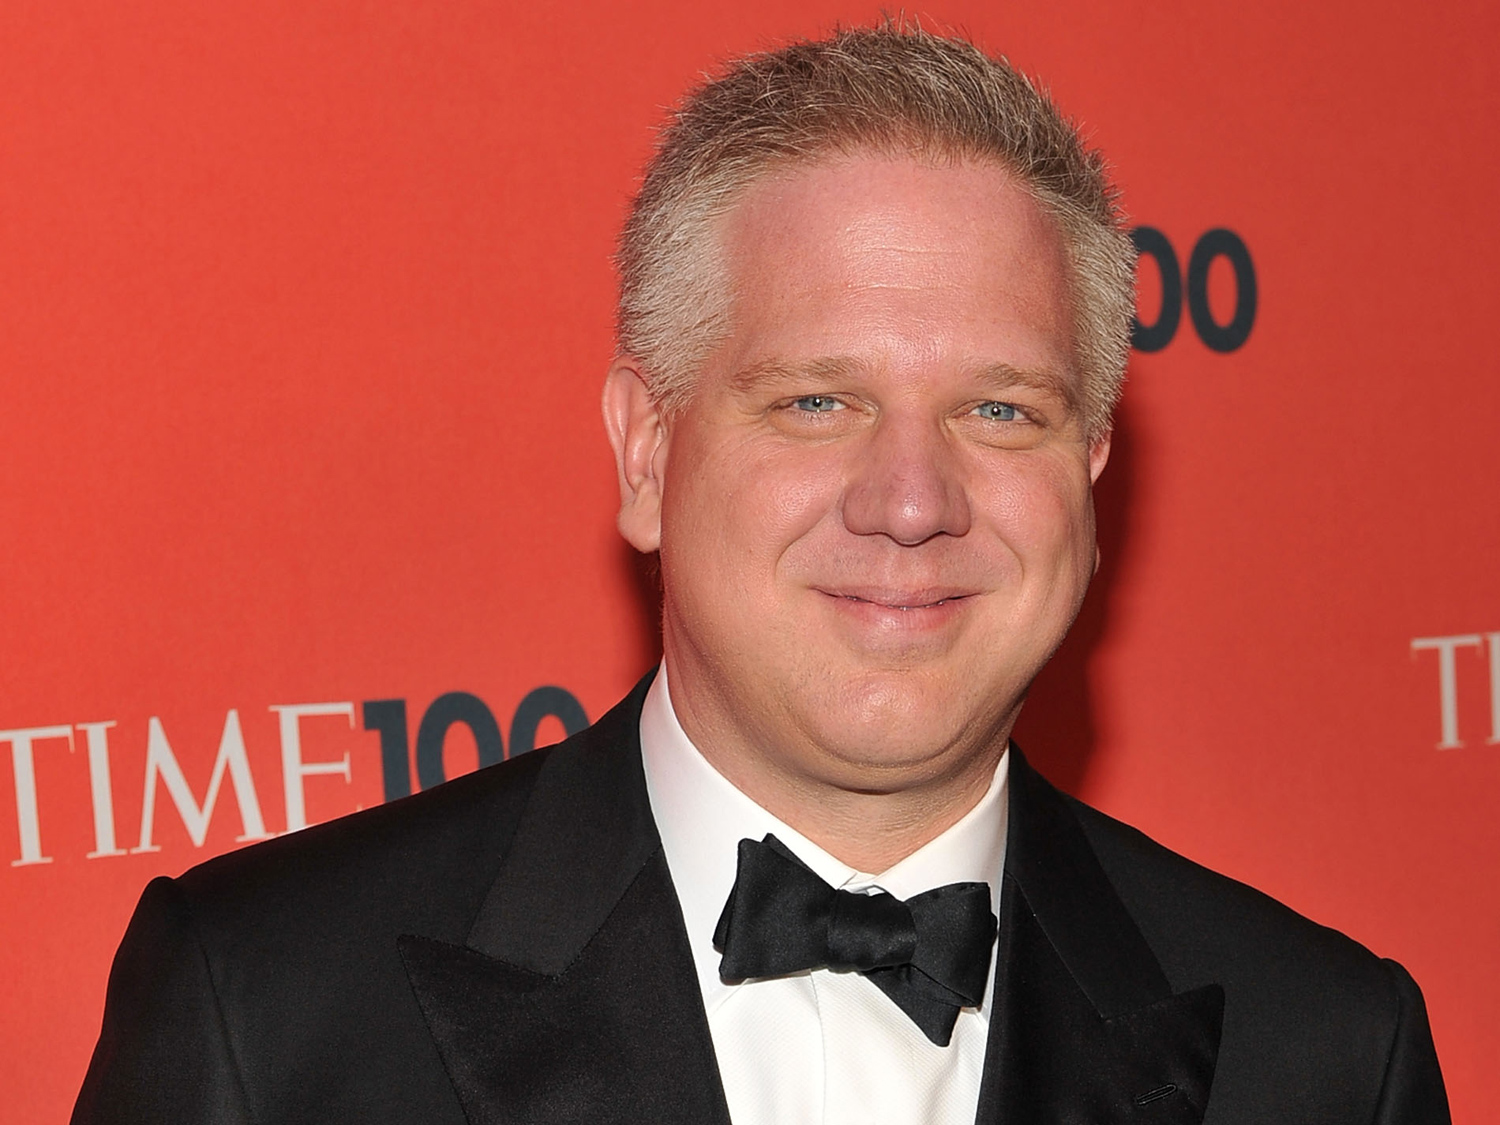 Glenn Beck's greatest hits, in honor of his last show CBS News